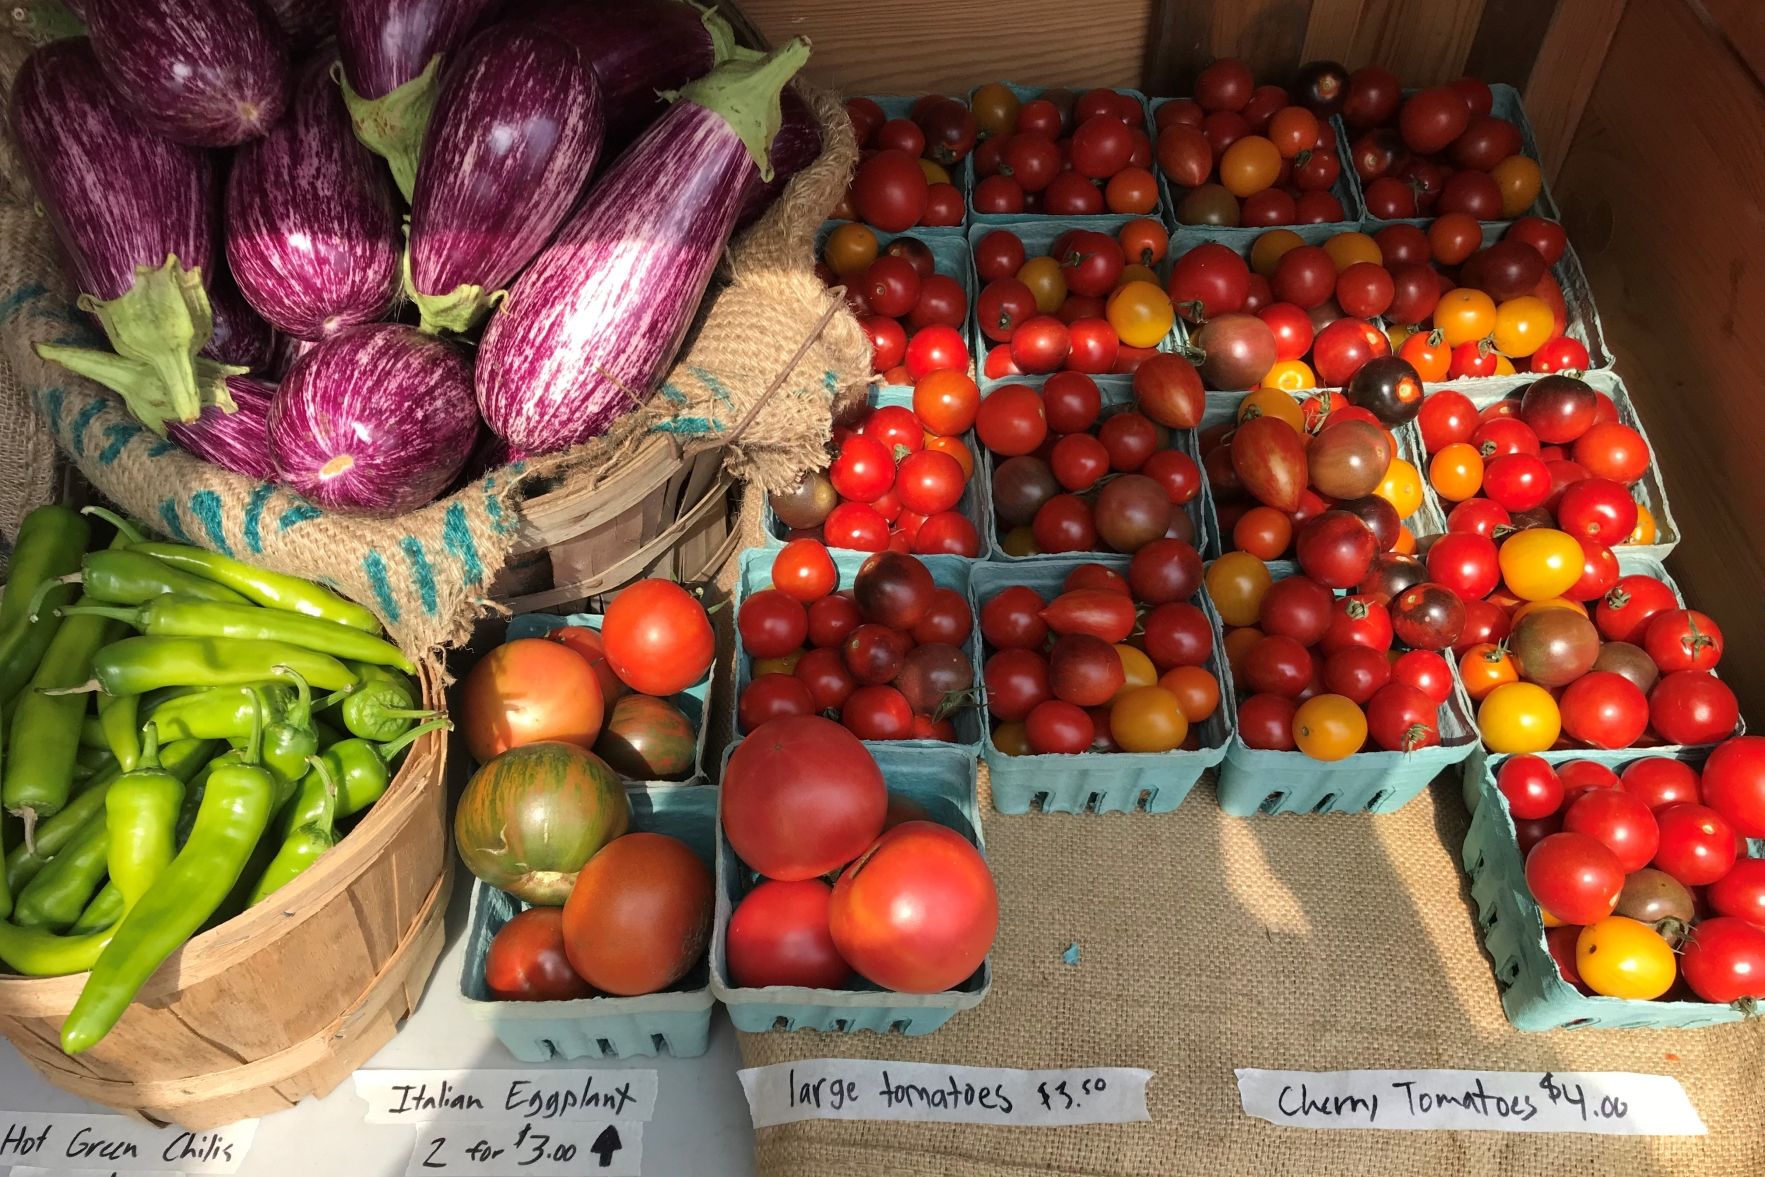 Tomatoes, eggplants and green chillies for sale at Fresh City Farms.